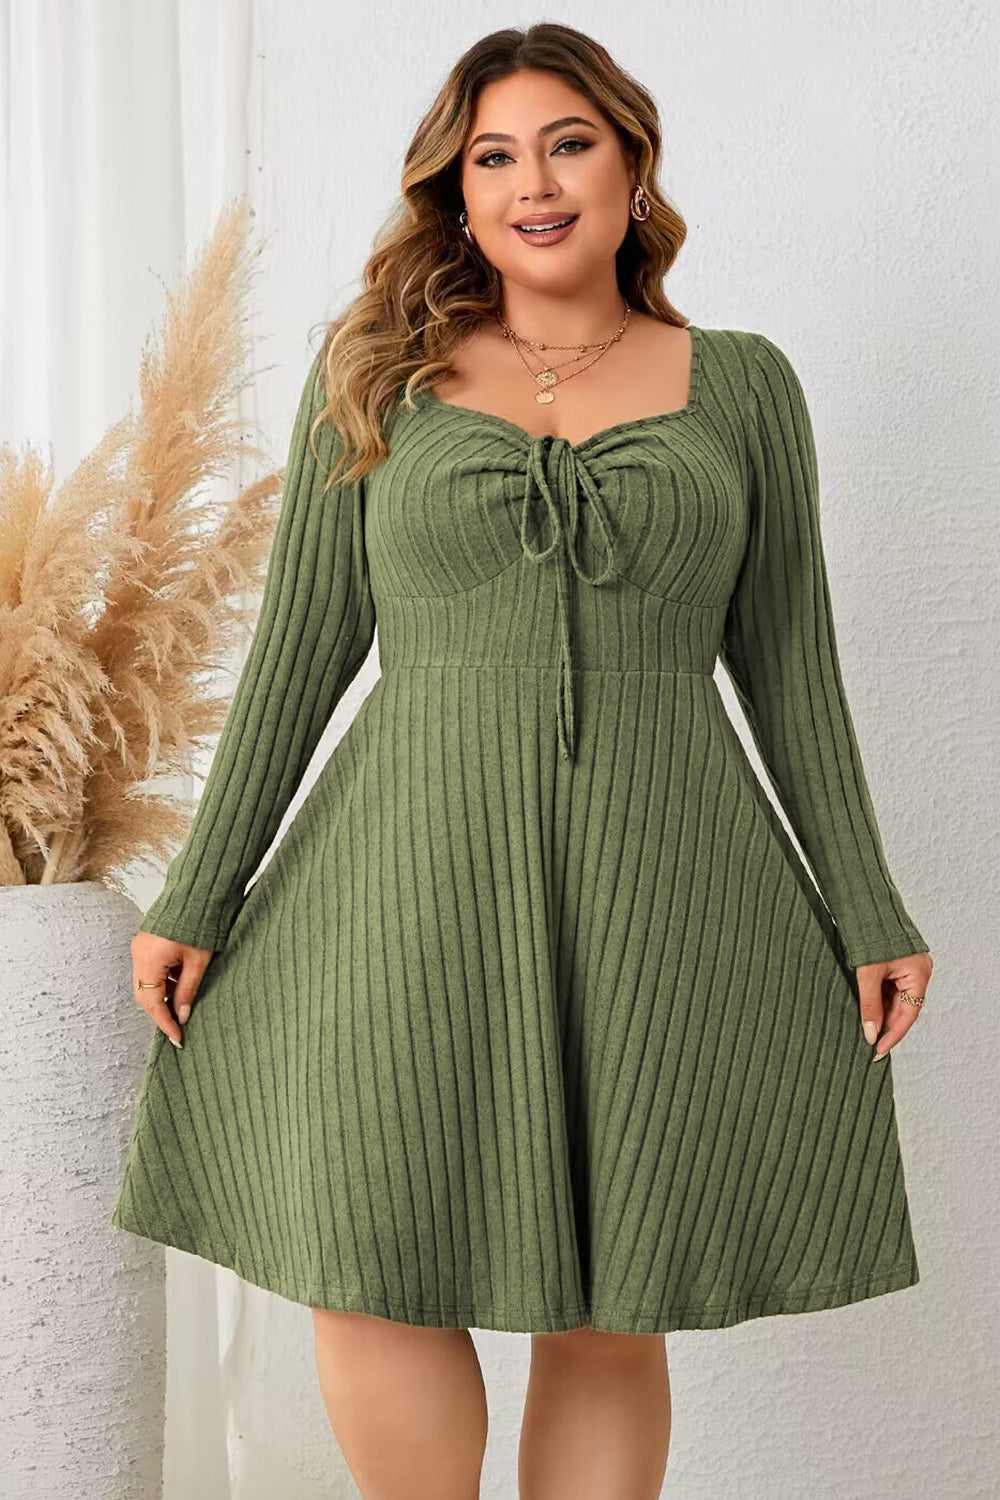 Elegant Plus Size Beach Wedding Guest Dress with Sweetheart Neckline, Long Sleeves, and Ribbed Fabric - Perfect for Summer Celebrations